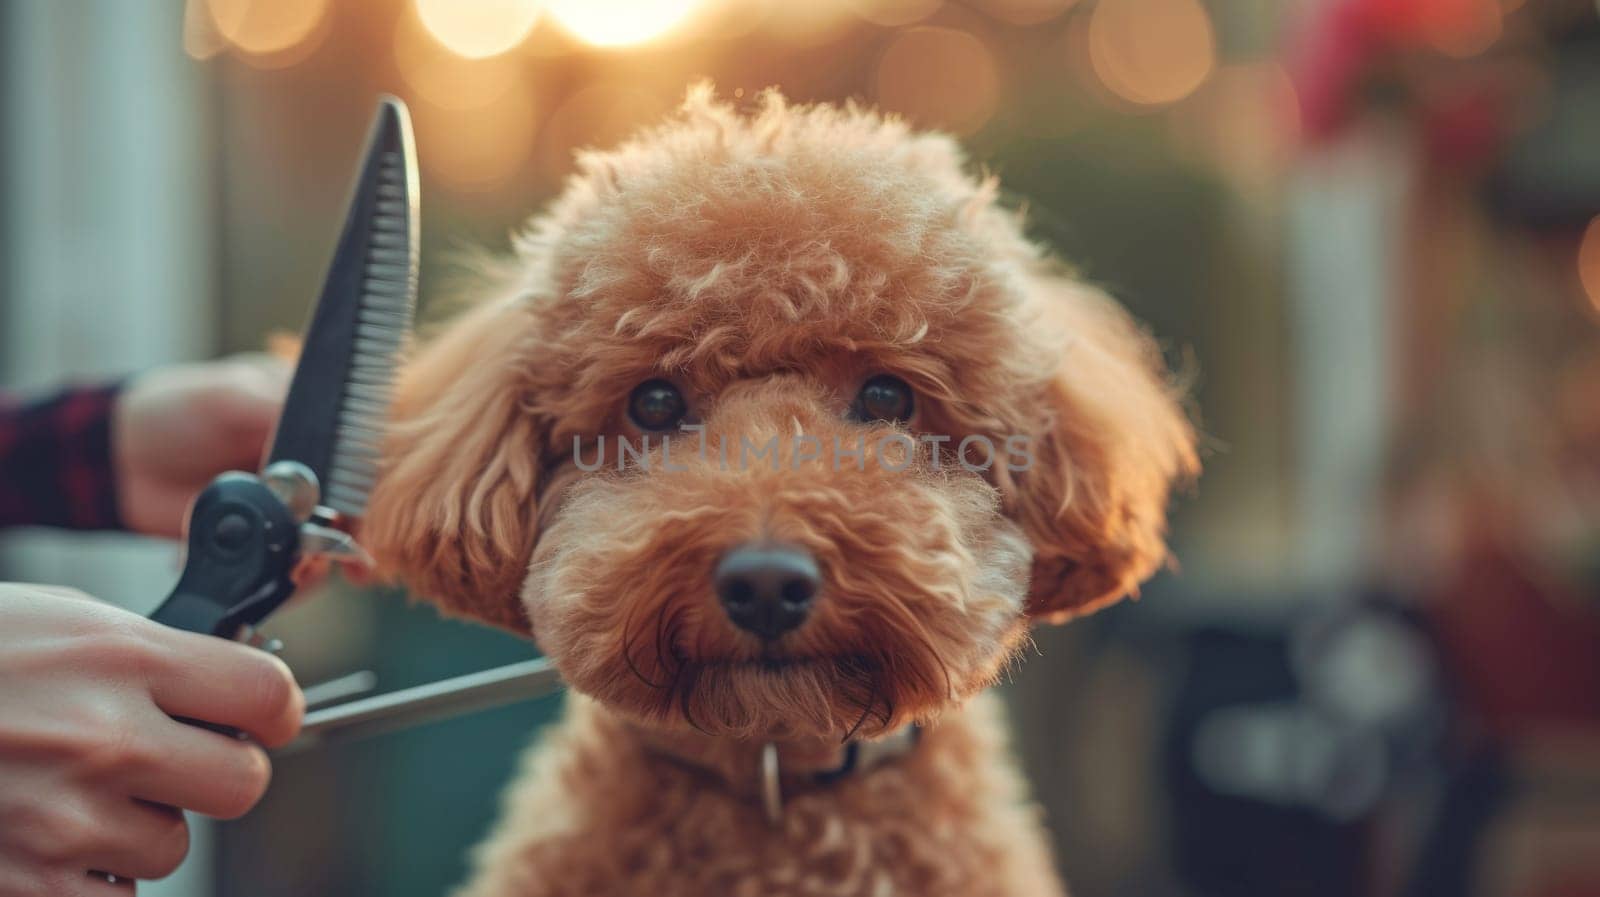 A dog being groomed by a person with scissors, AI by starush